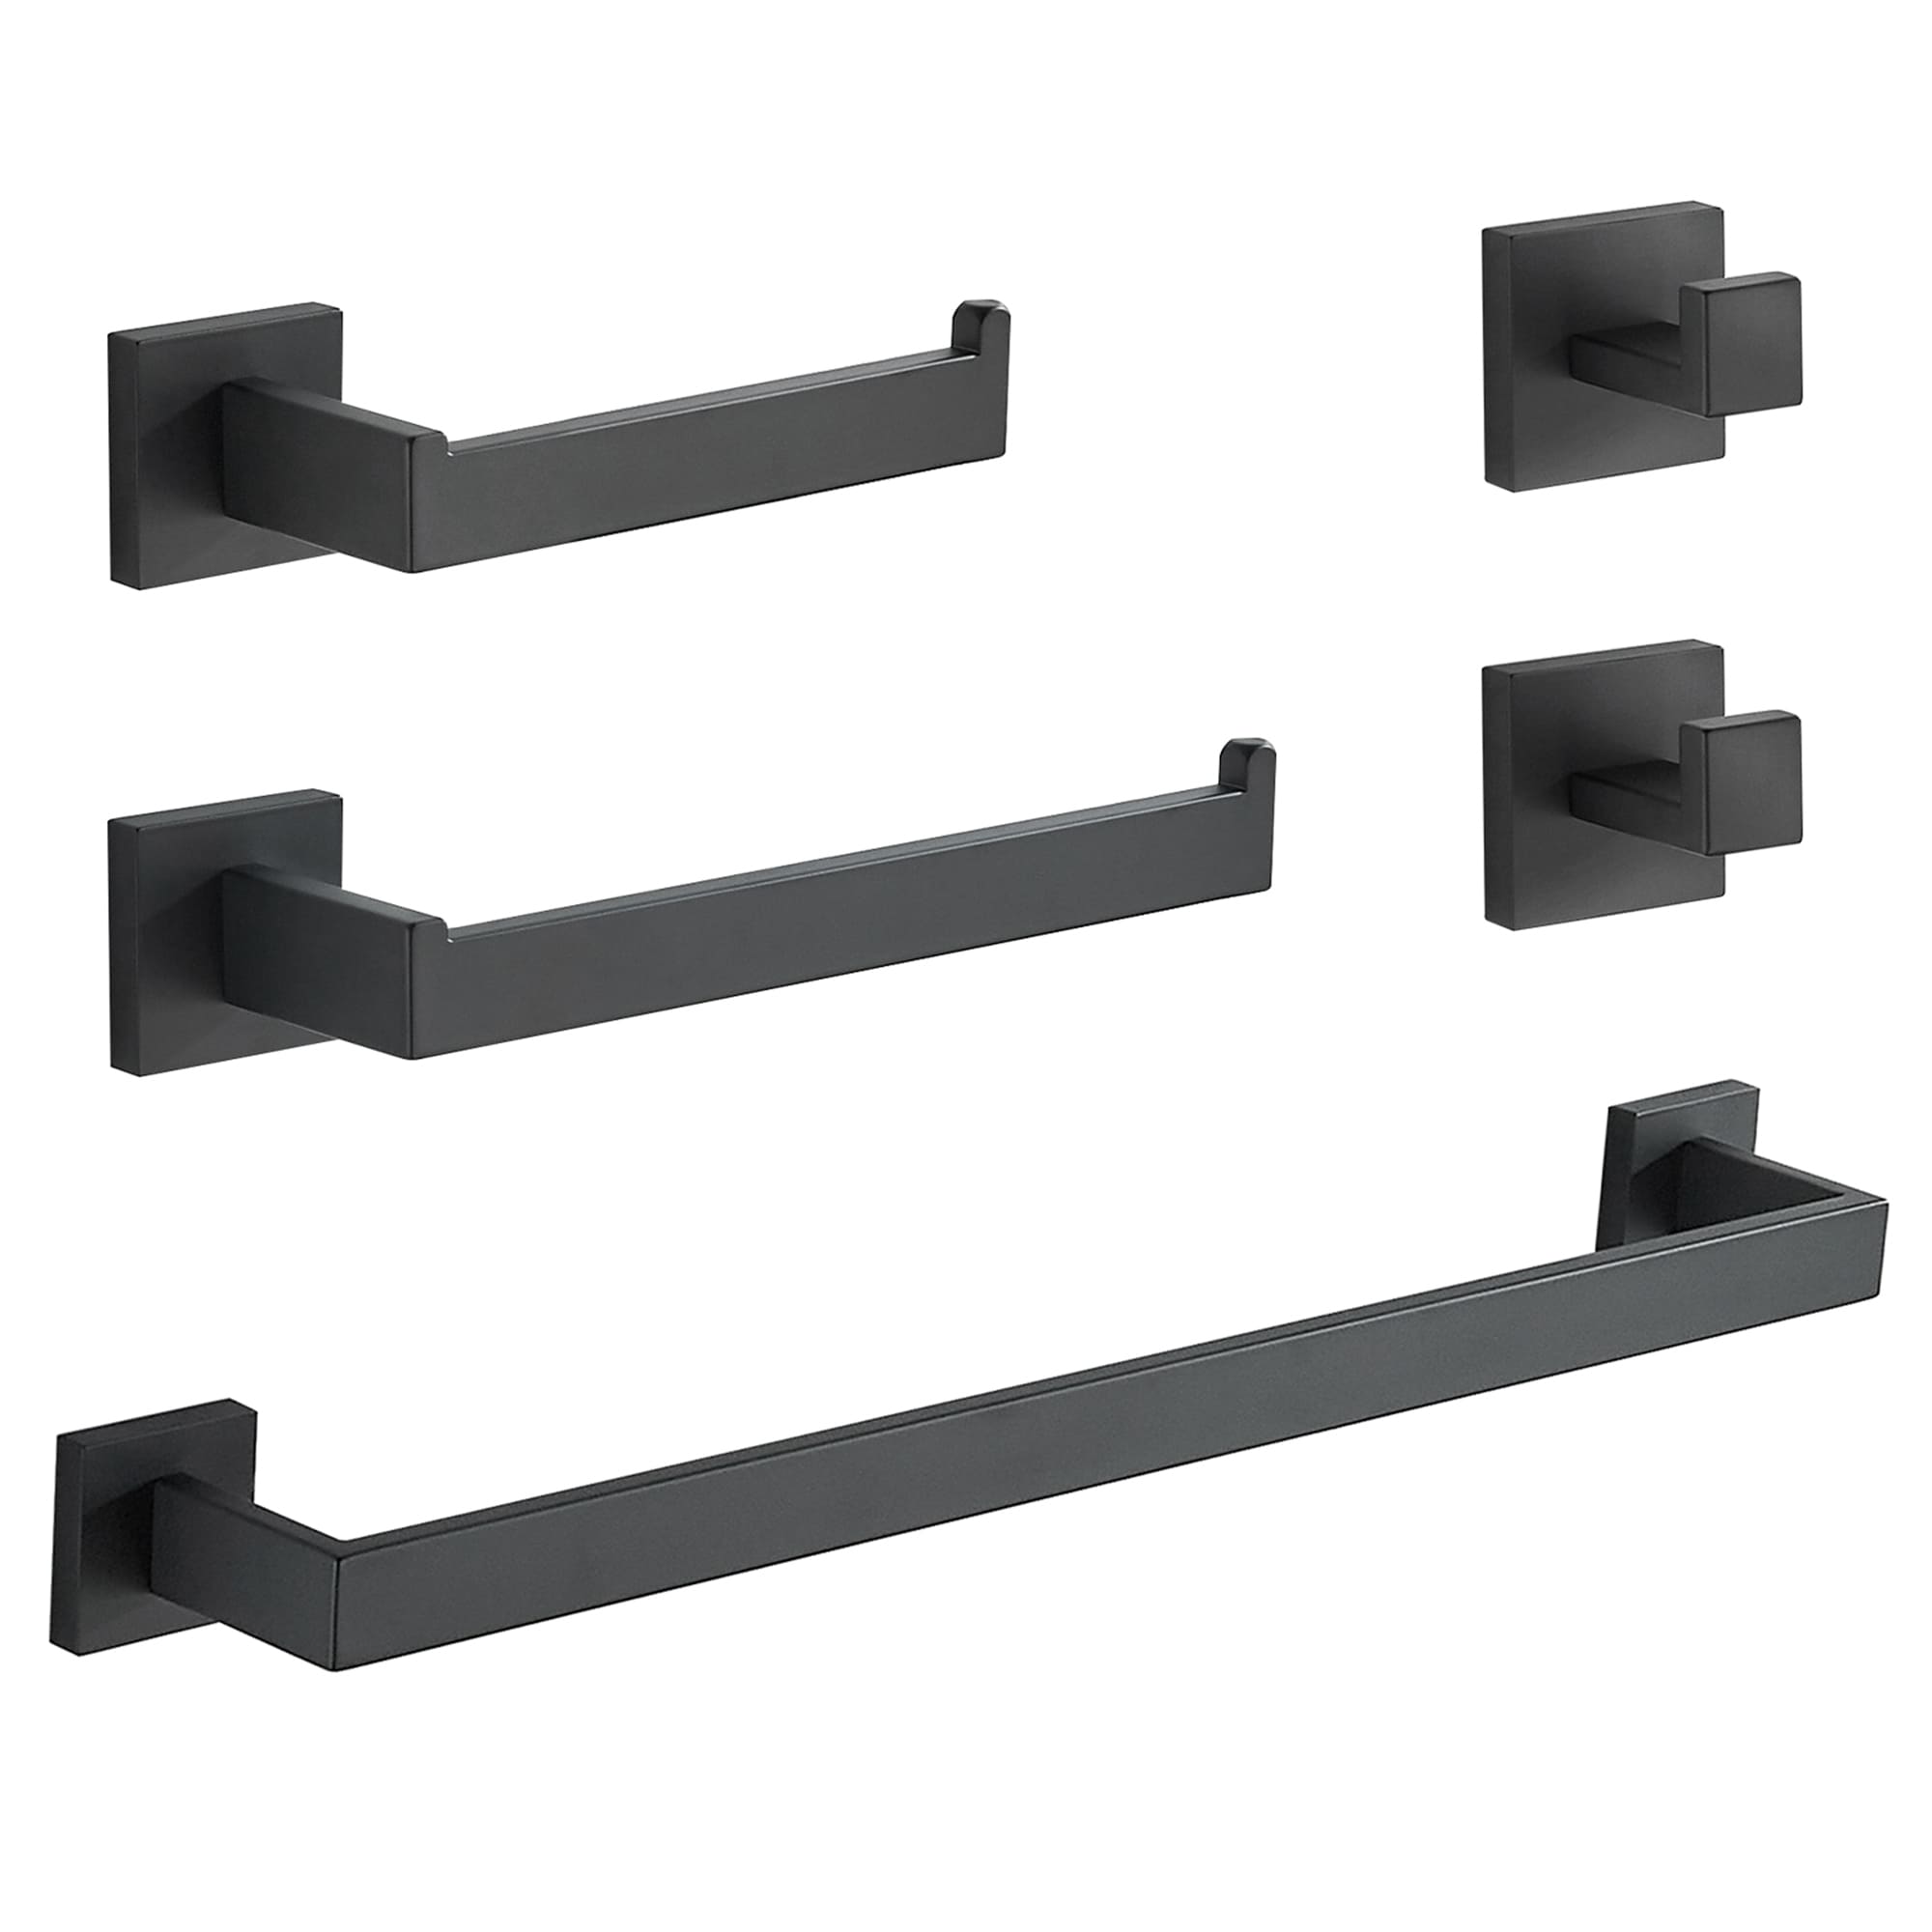 FORIOUS 5-Piece Matte Black Decorative Bathroom Hardware Set with Towel Bar,Toilet Paper Holder and Robe Hook | LL19002B5A